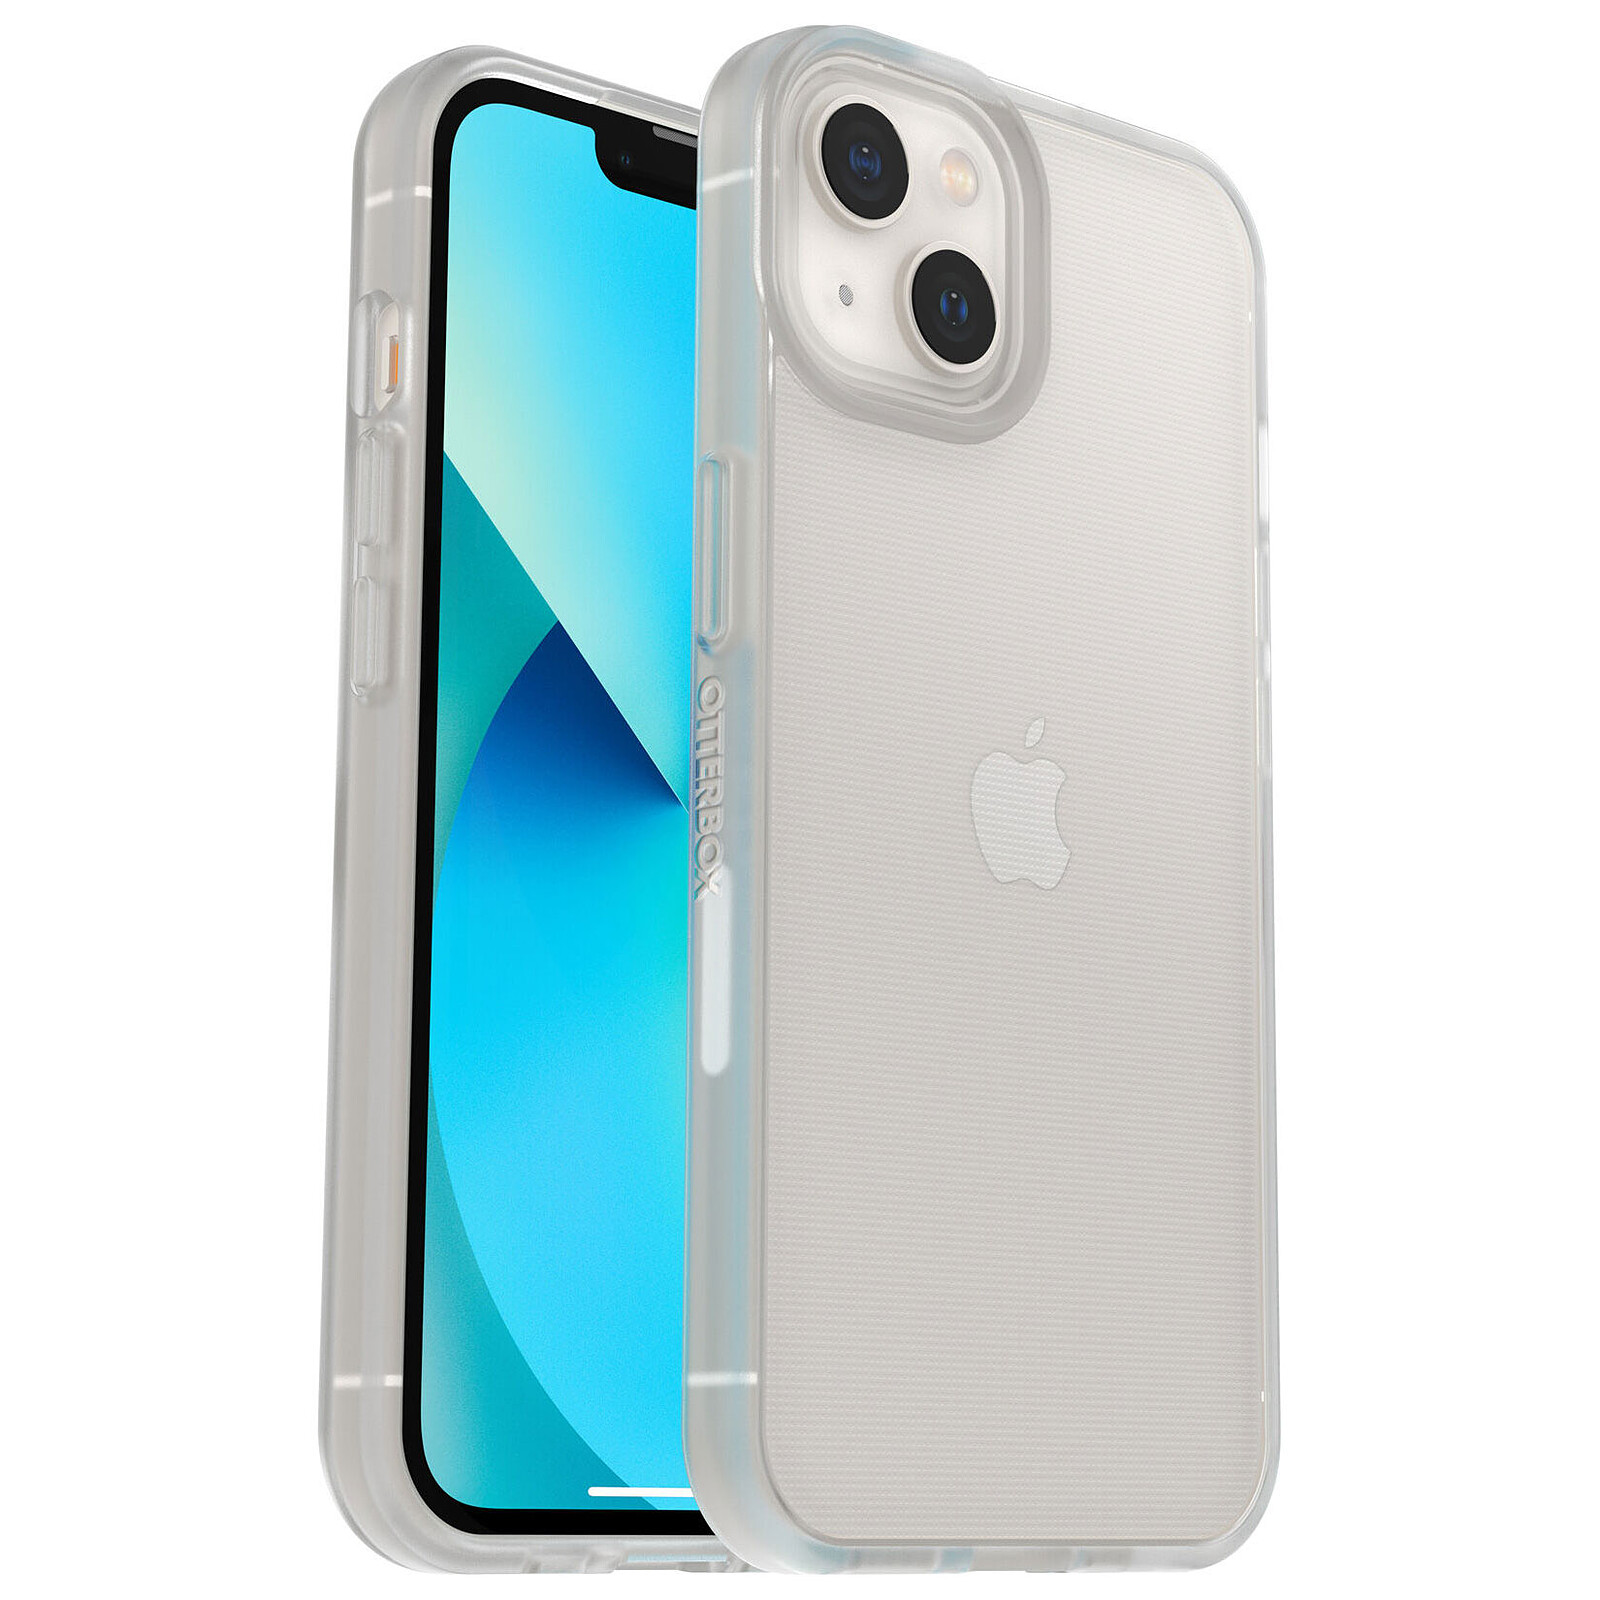 Otterbox React Series iPhone 13 Pro Max Case - Black / Clear